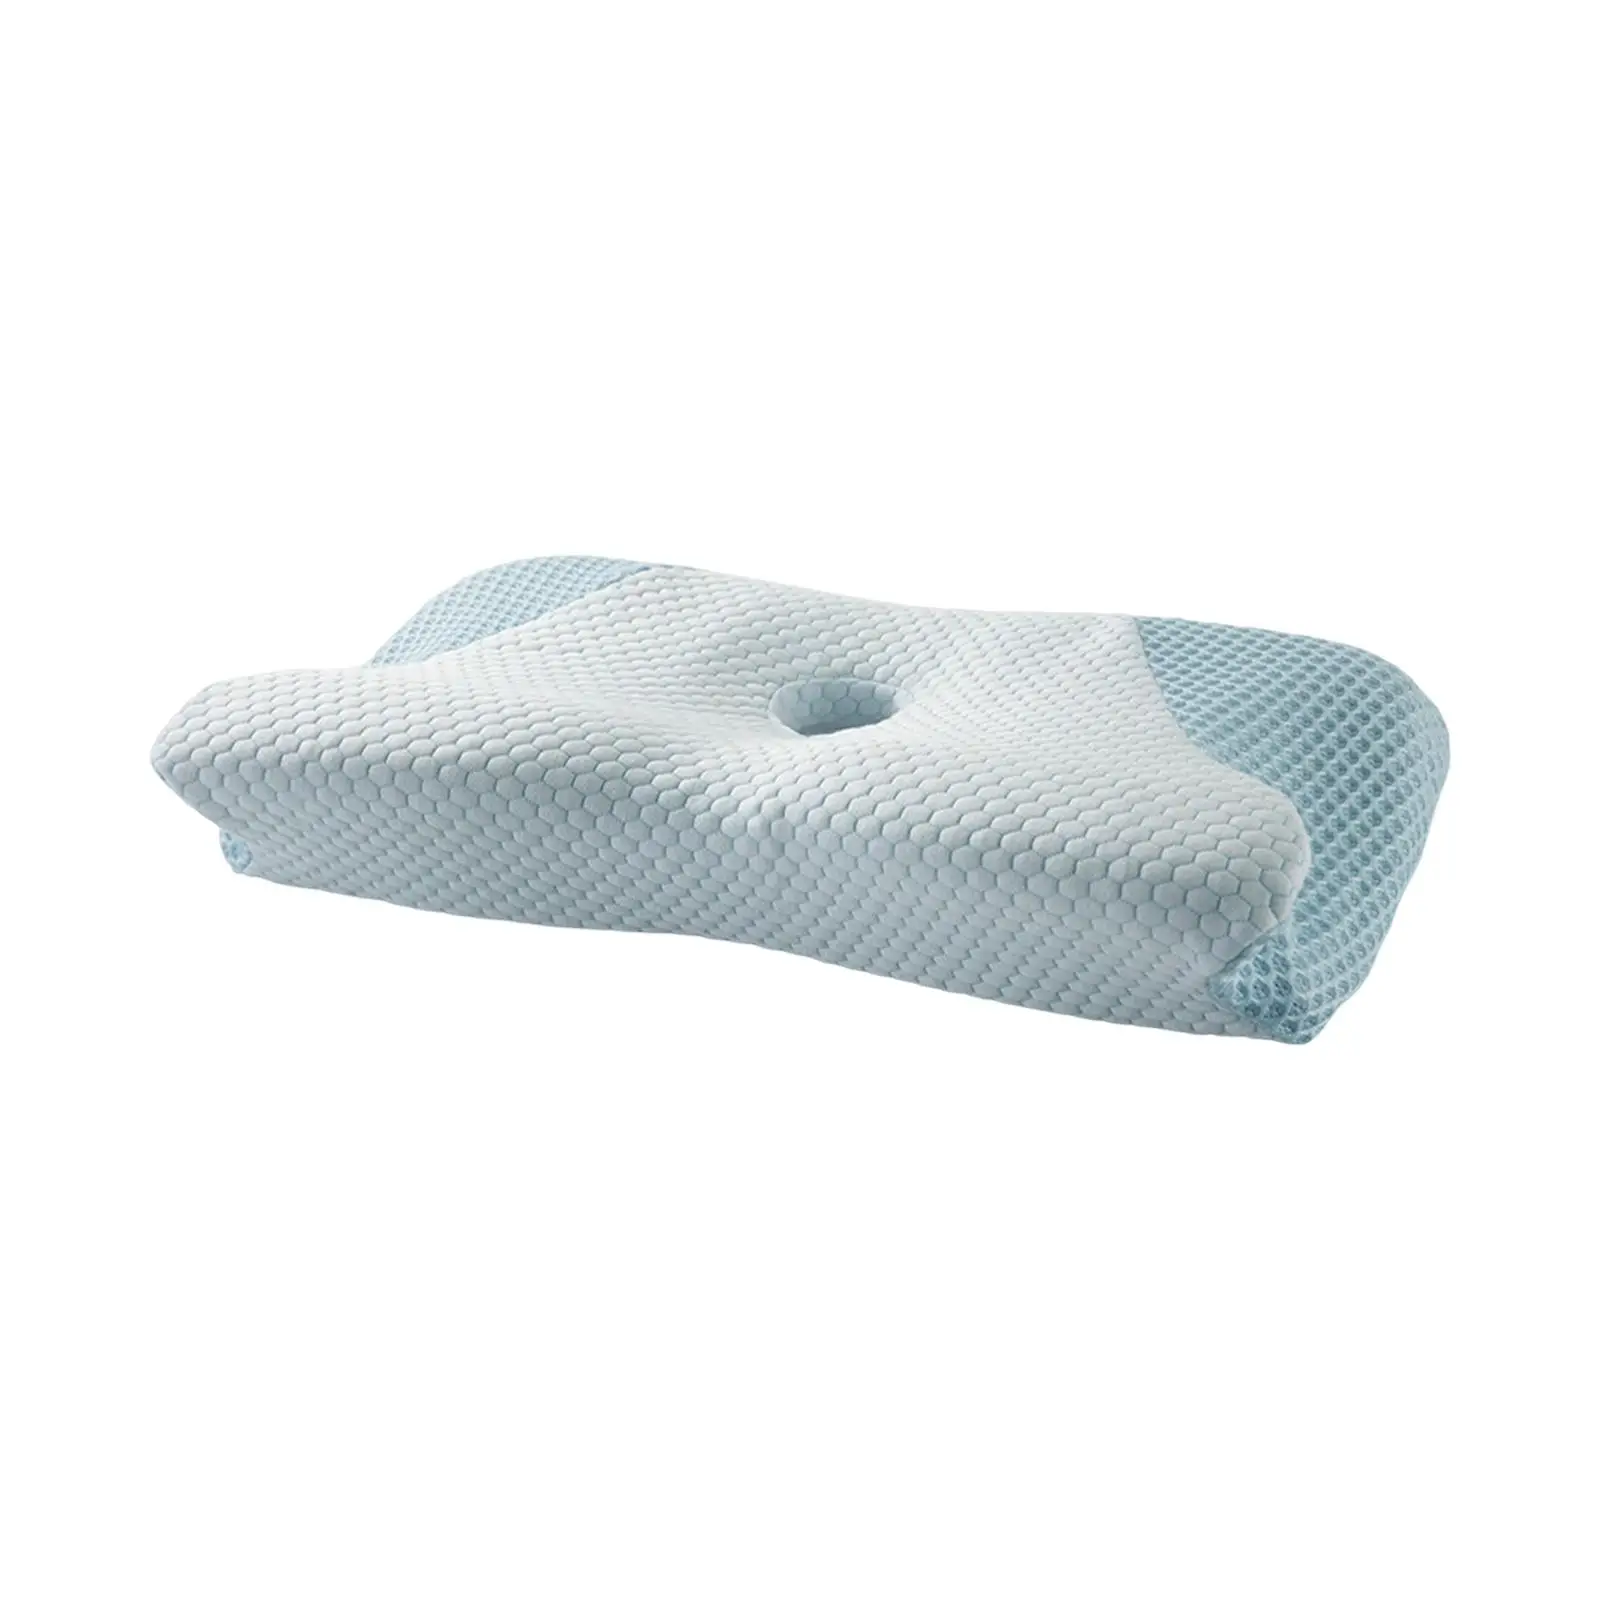 Sleeping Pillow Latex Pillow Side Pillow Comfortable for Sleeping Neck Gifts